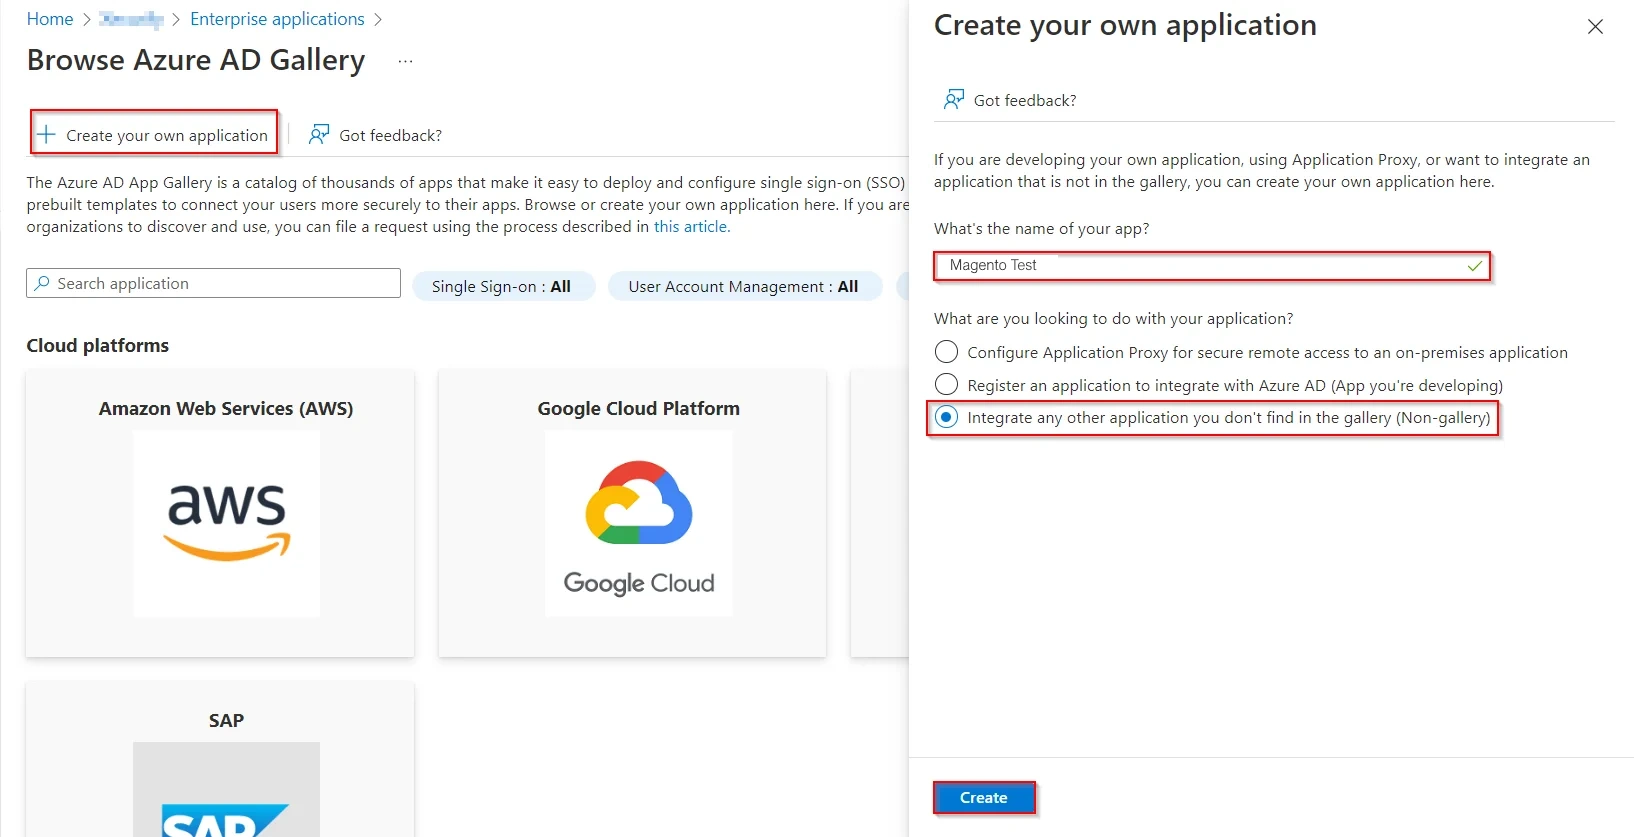 Microsoft Azure AD User Provisioning and Sync - Create your own application, enter app name, and select Non-Gallery